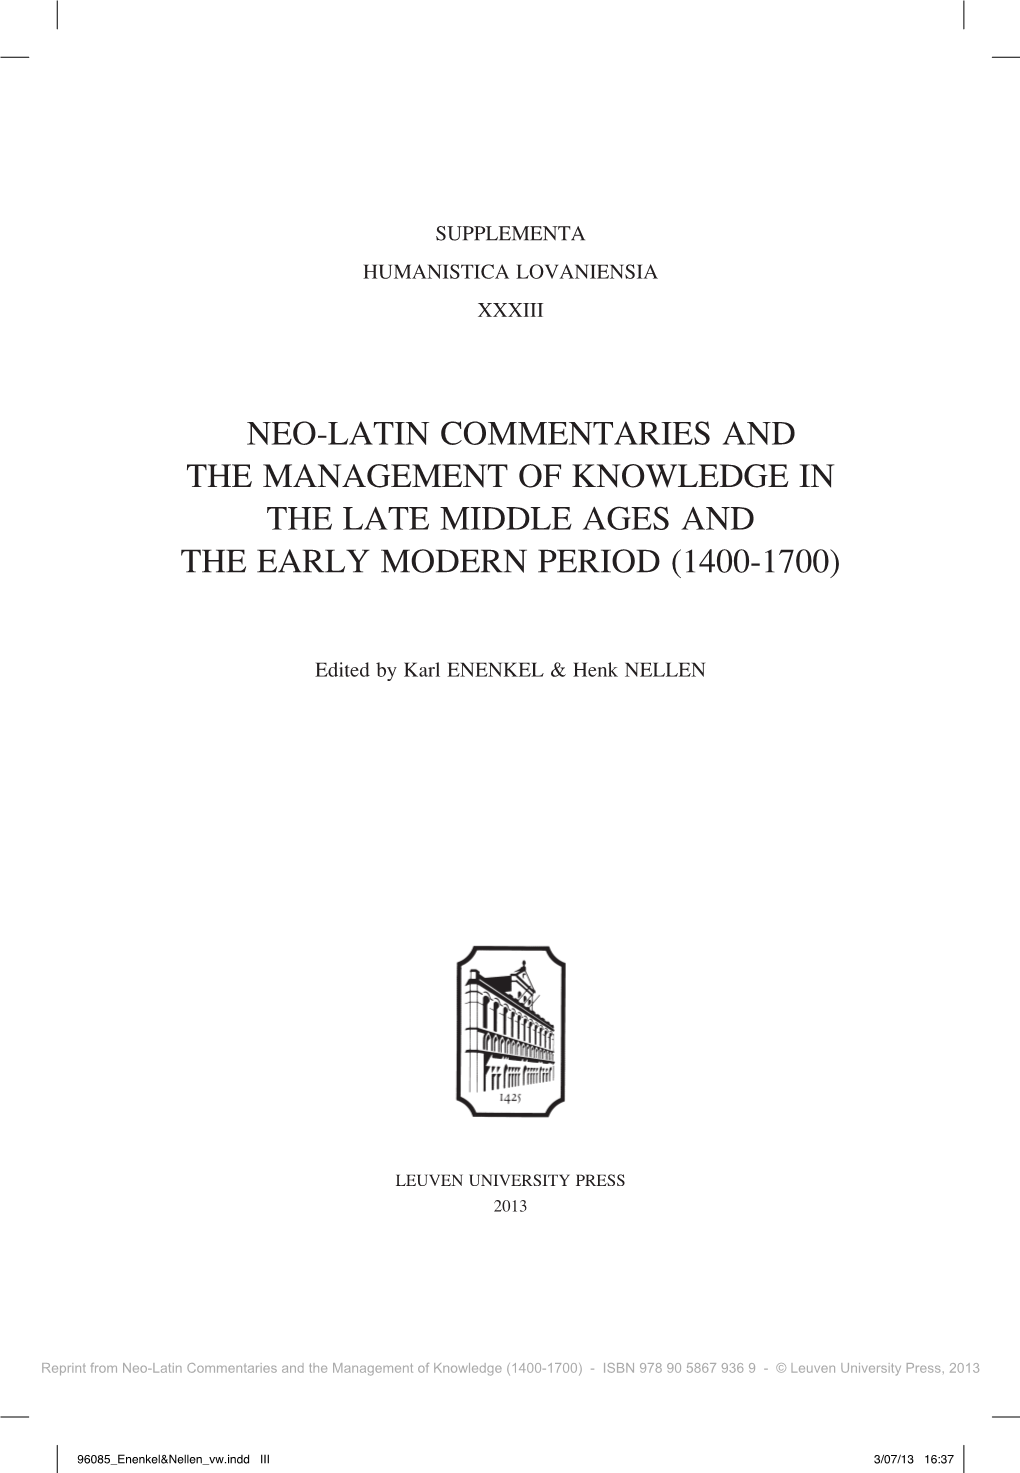 Neo-Latin Commentaries and the Management of Knowledge in the Late Middle Ages and the Early Modern Period (1400-1700)